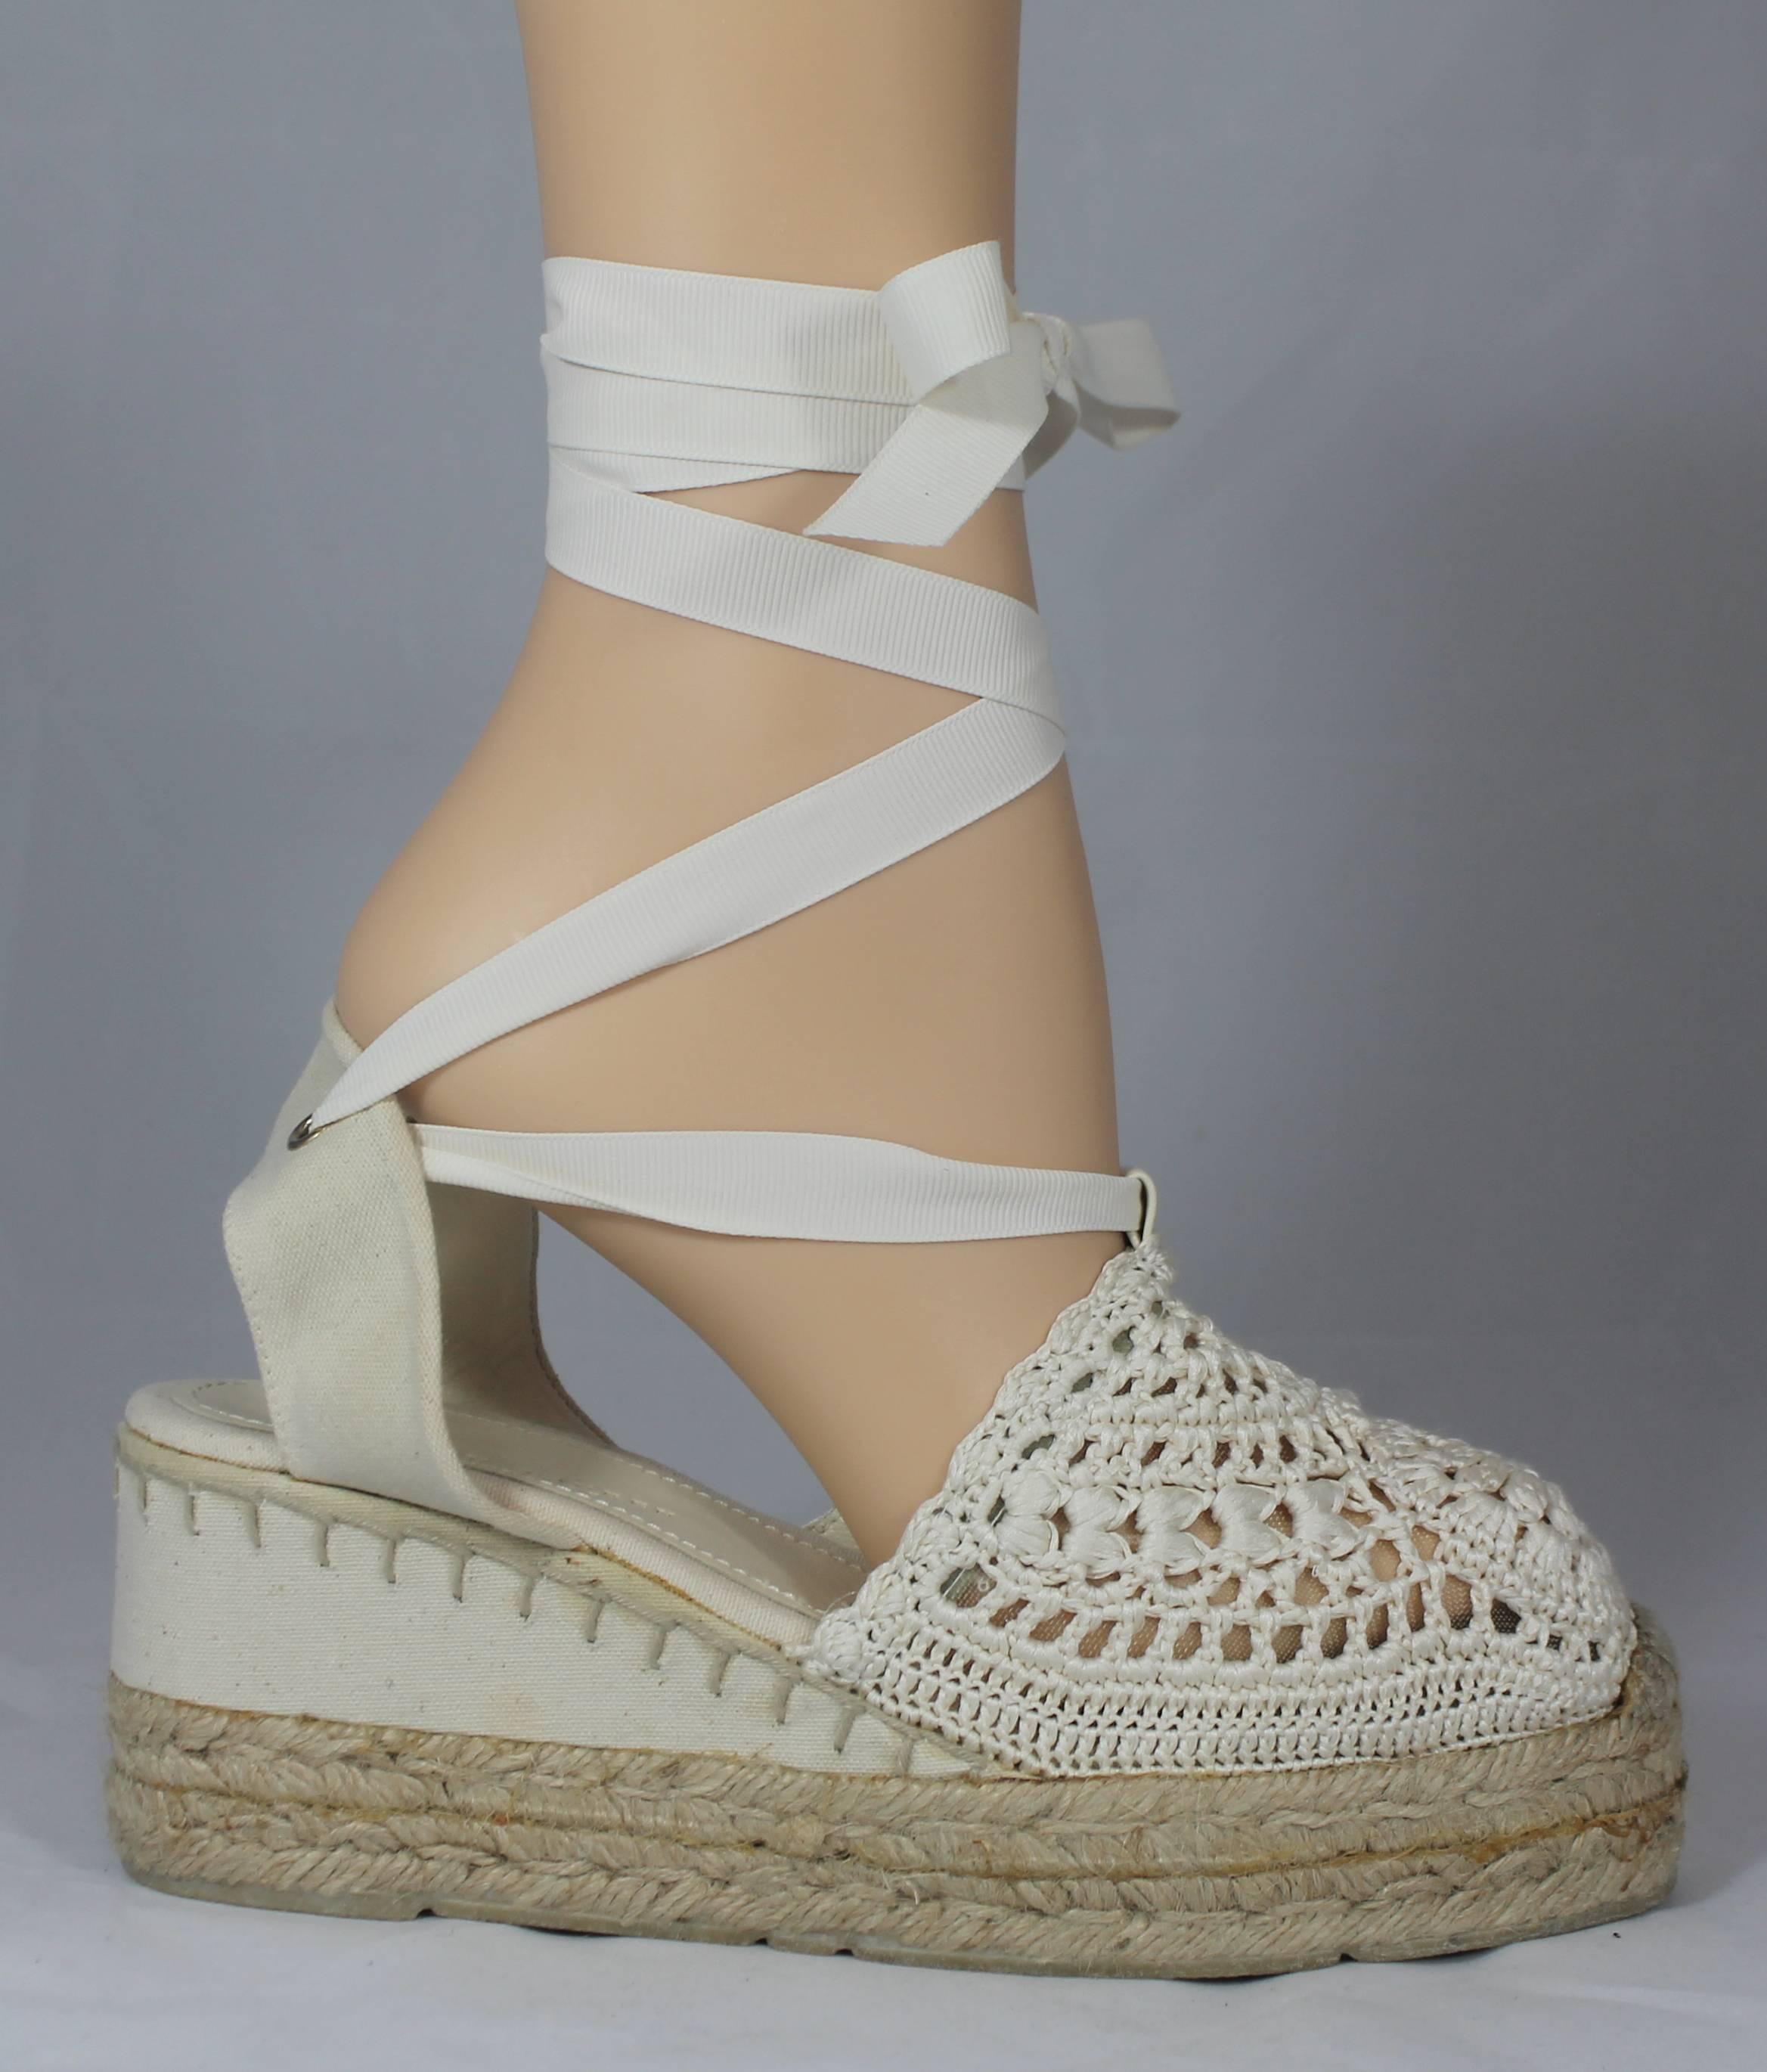 Ralph Lauren Collection White Crocheted Tie Up Espadrille Wedges - 6.5. These adorable wedges are white with an espadrille platform. They also have white ribbon that ties up around the leg. They are in good condition with minor discoloration and